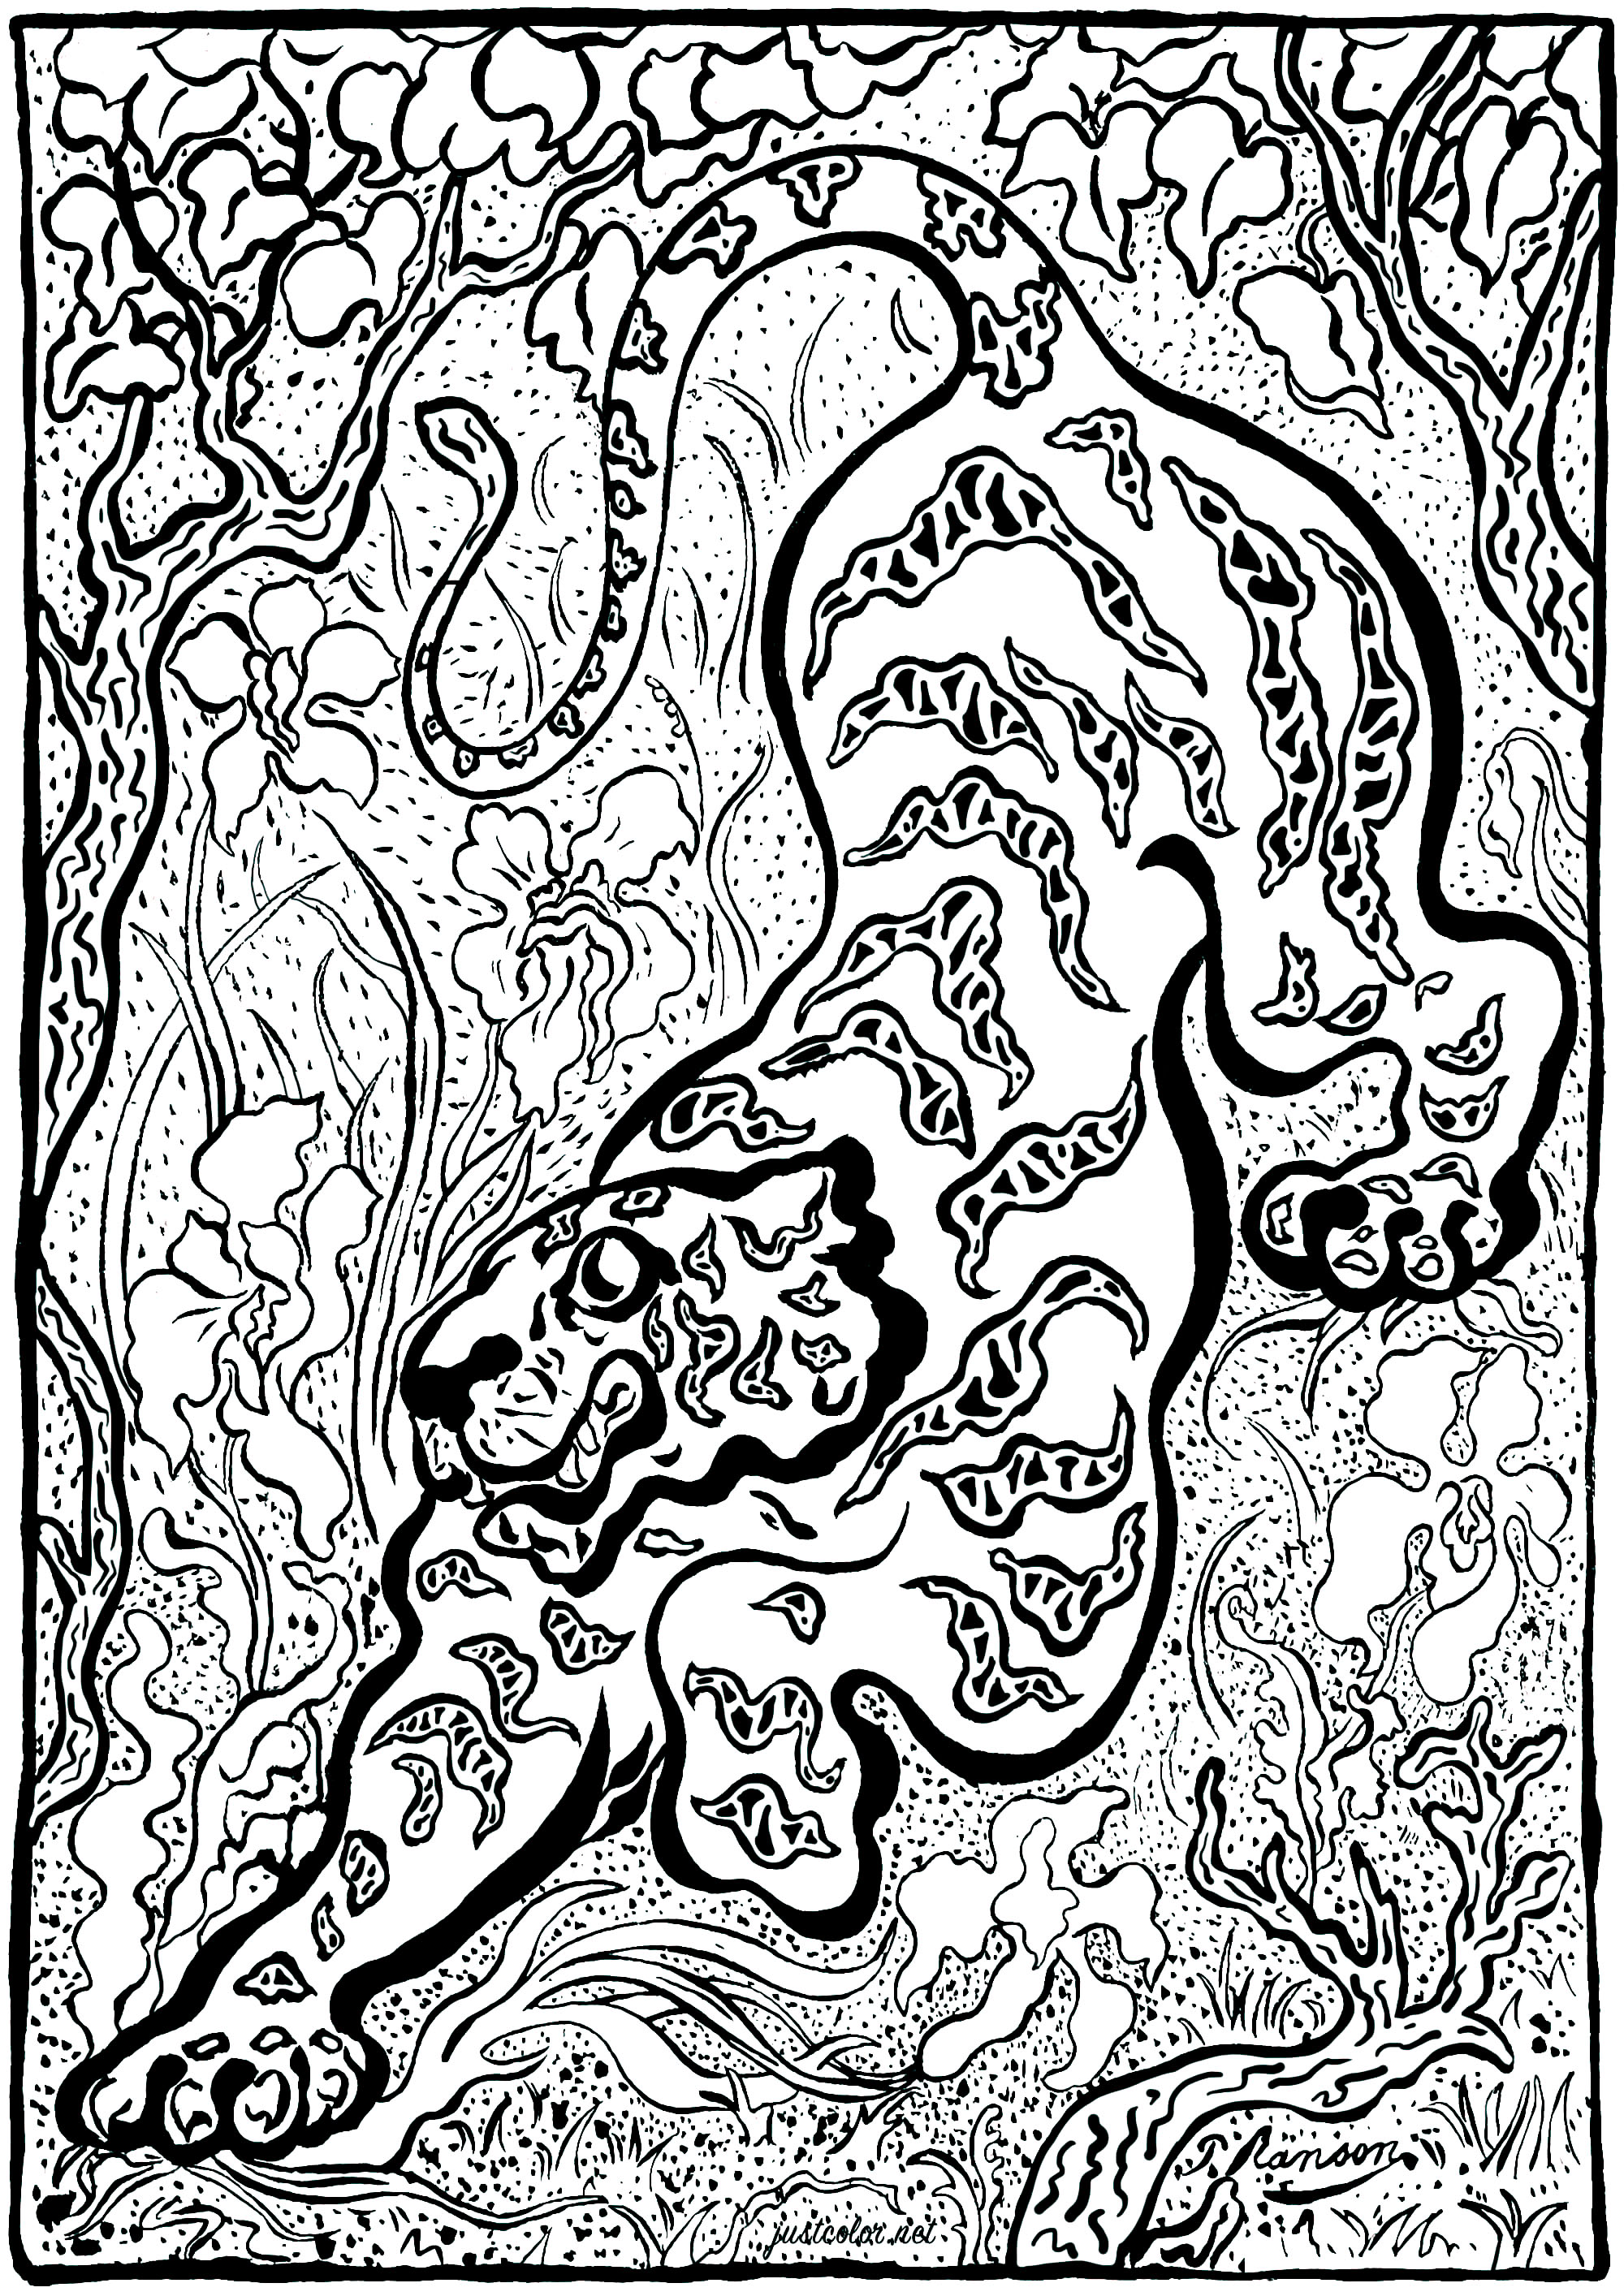 Coloring page created from Paul-Élie Ranson's artwork 'Tiger in the Jungle' (1883) - Version 2 (complex). Paul-Élie Ranson, who belongs to 'Les Nabis' group, has developed an original style with symbolist and esoteric resonances.Inscribed in the history of post-impressionism but breaking with impressionism, the nabi movement advocates a return to the imagination and subjectivity.